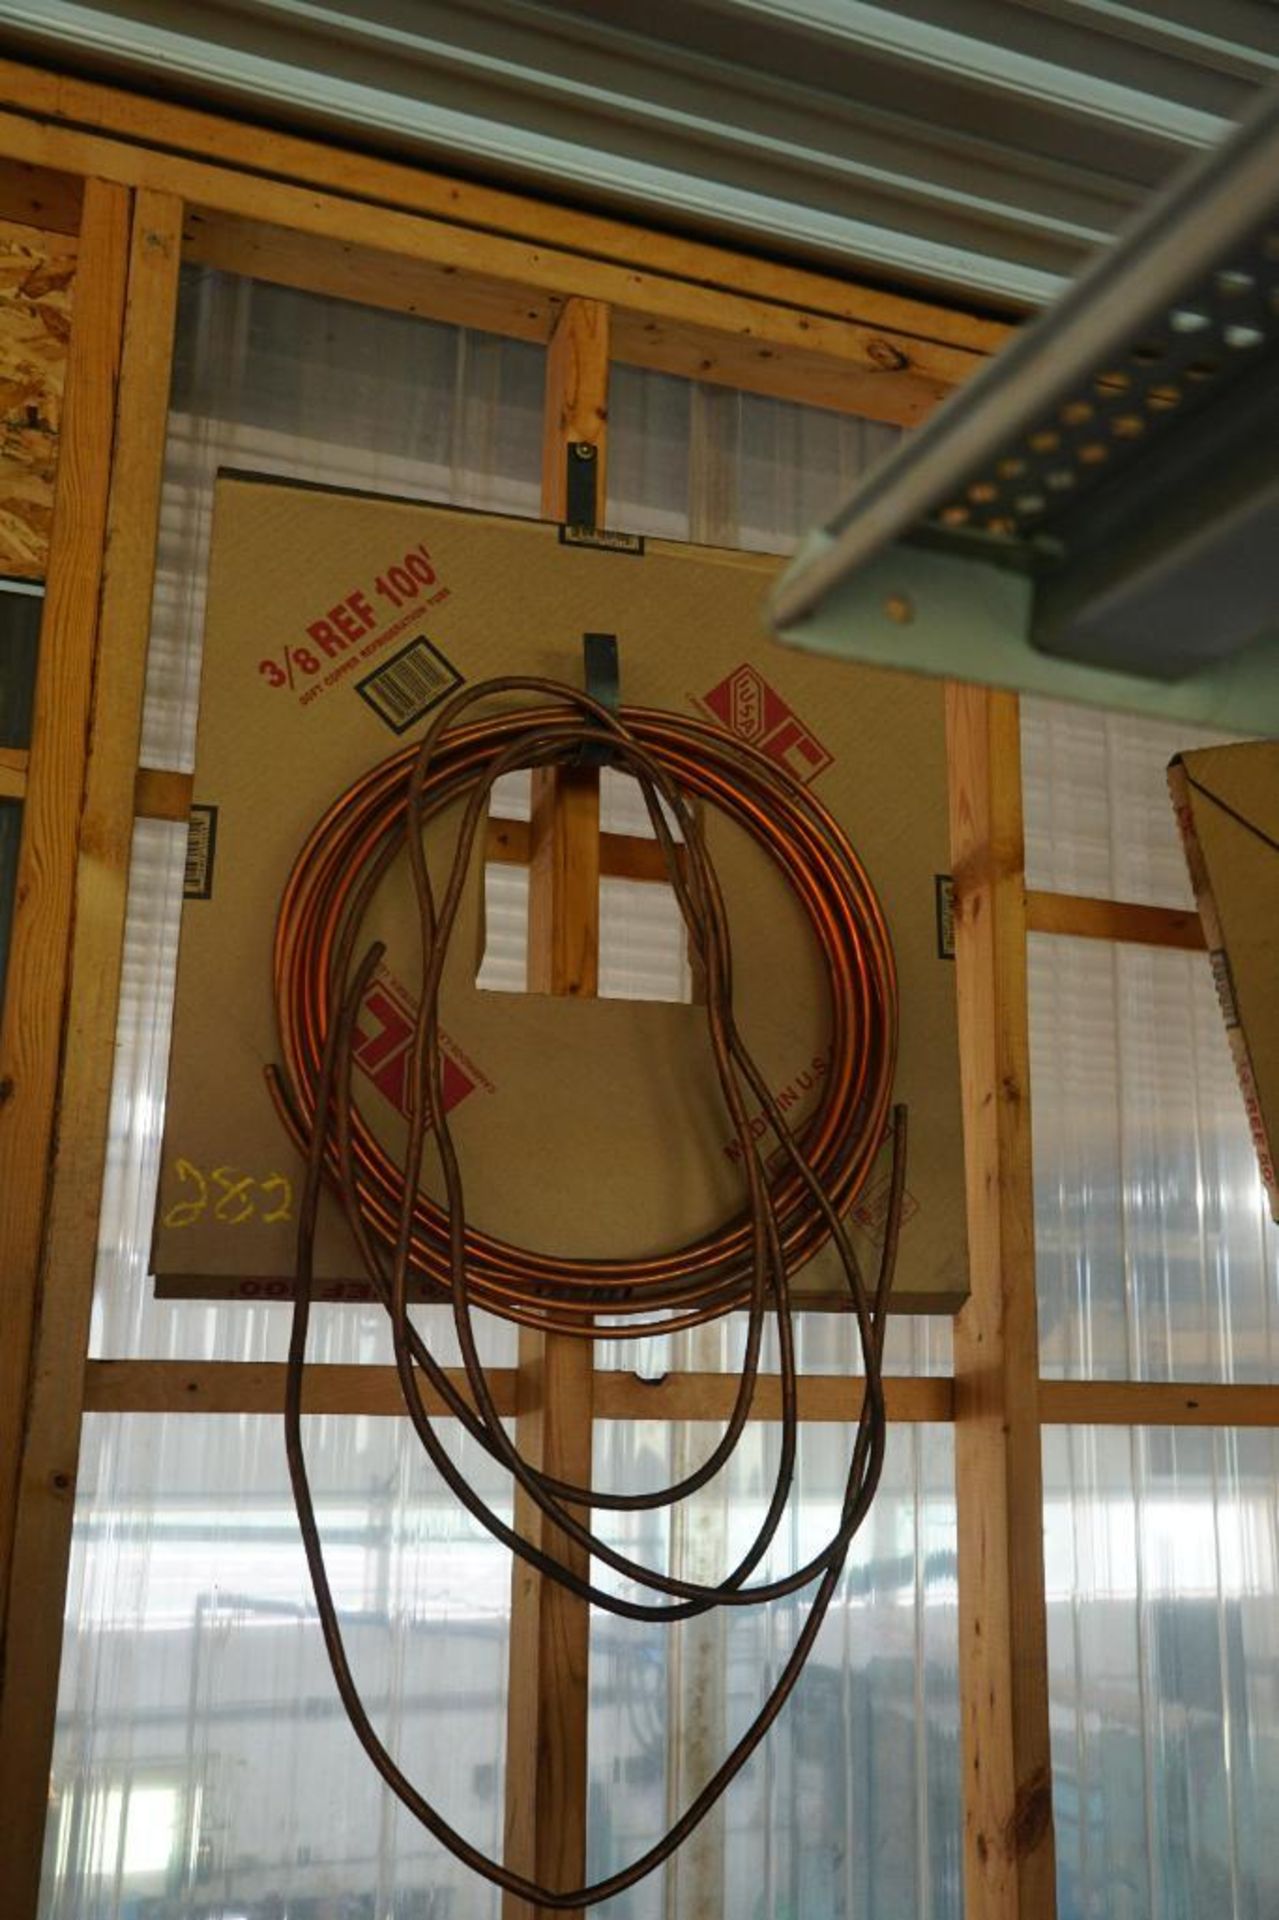 Copper Tubing and V Belts on Wall - Image 4 of 11